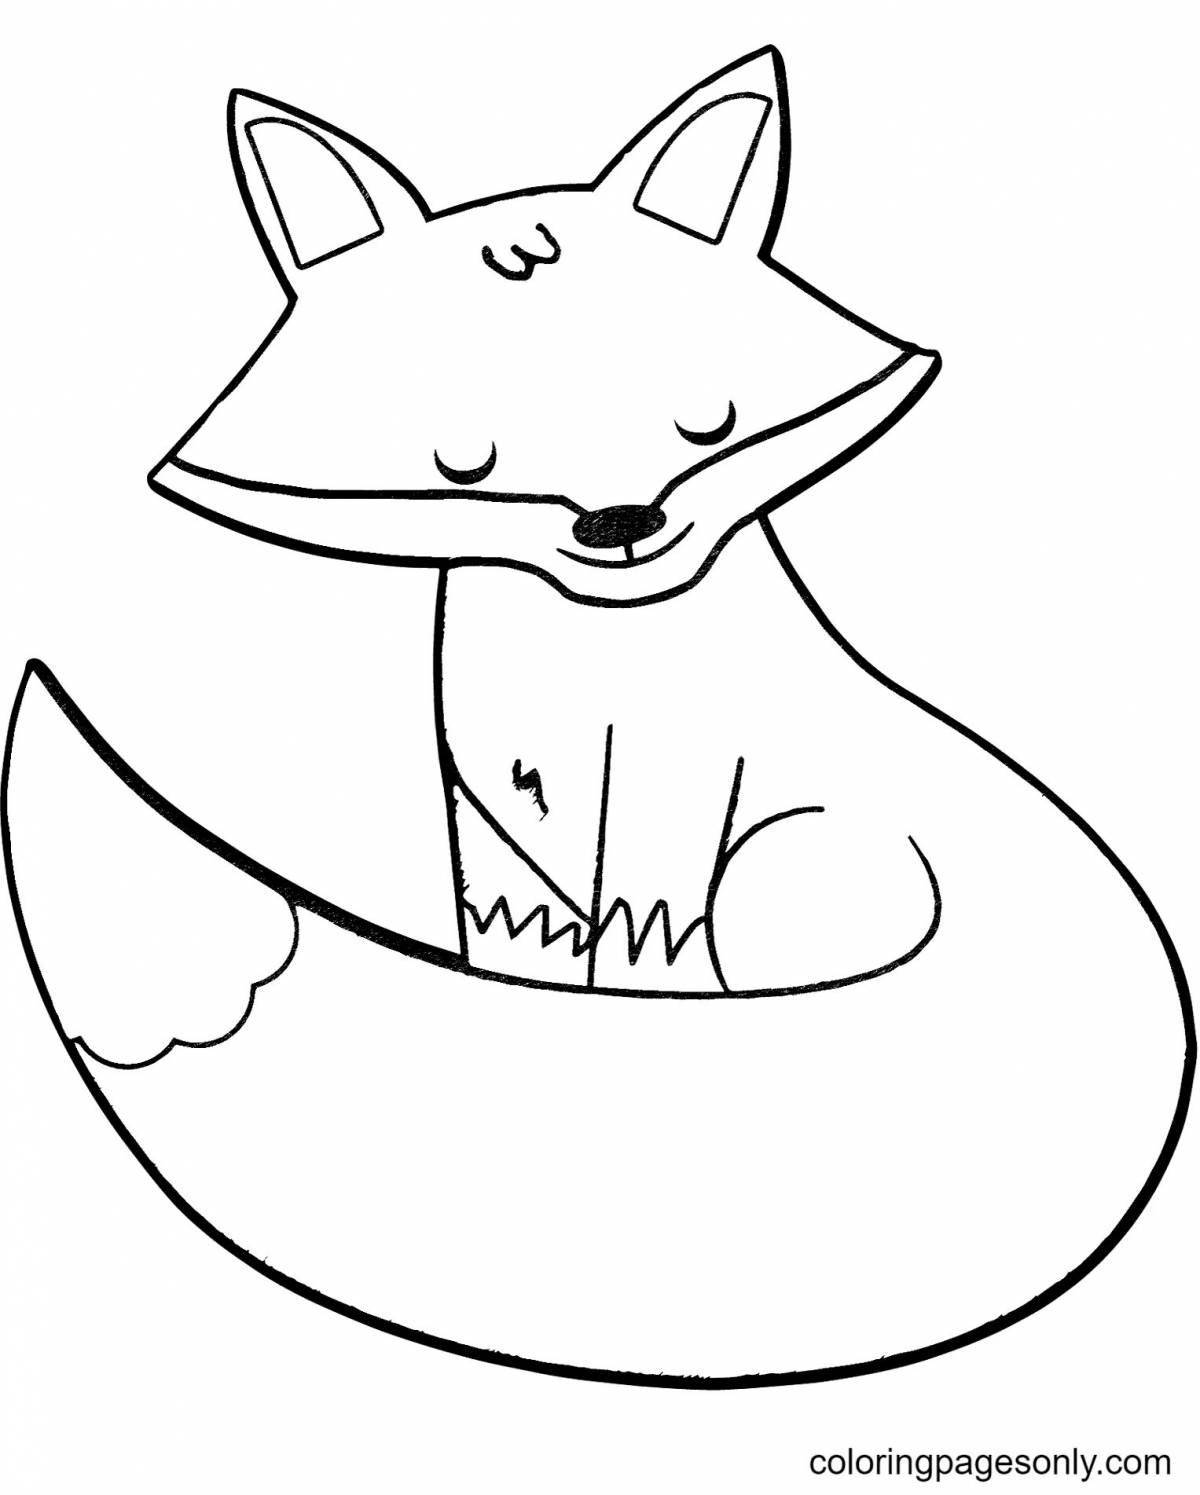 Glamorous fox coloring book for kids